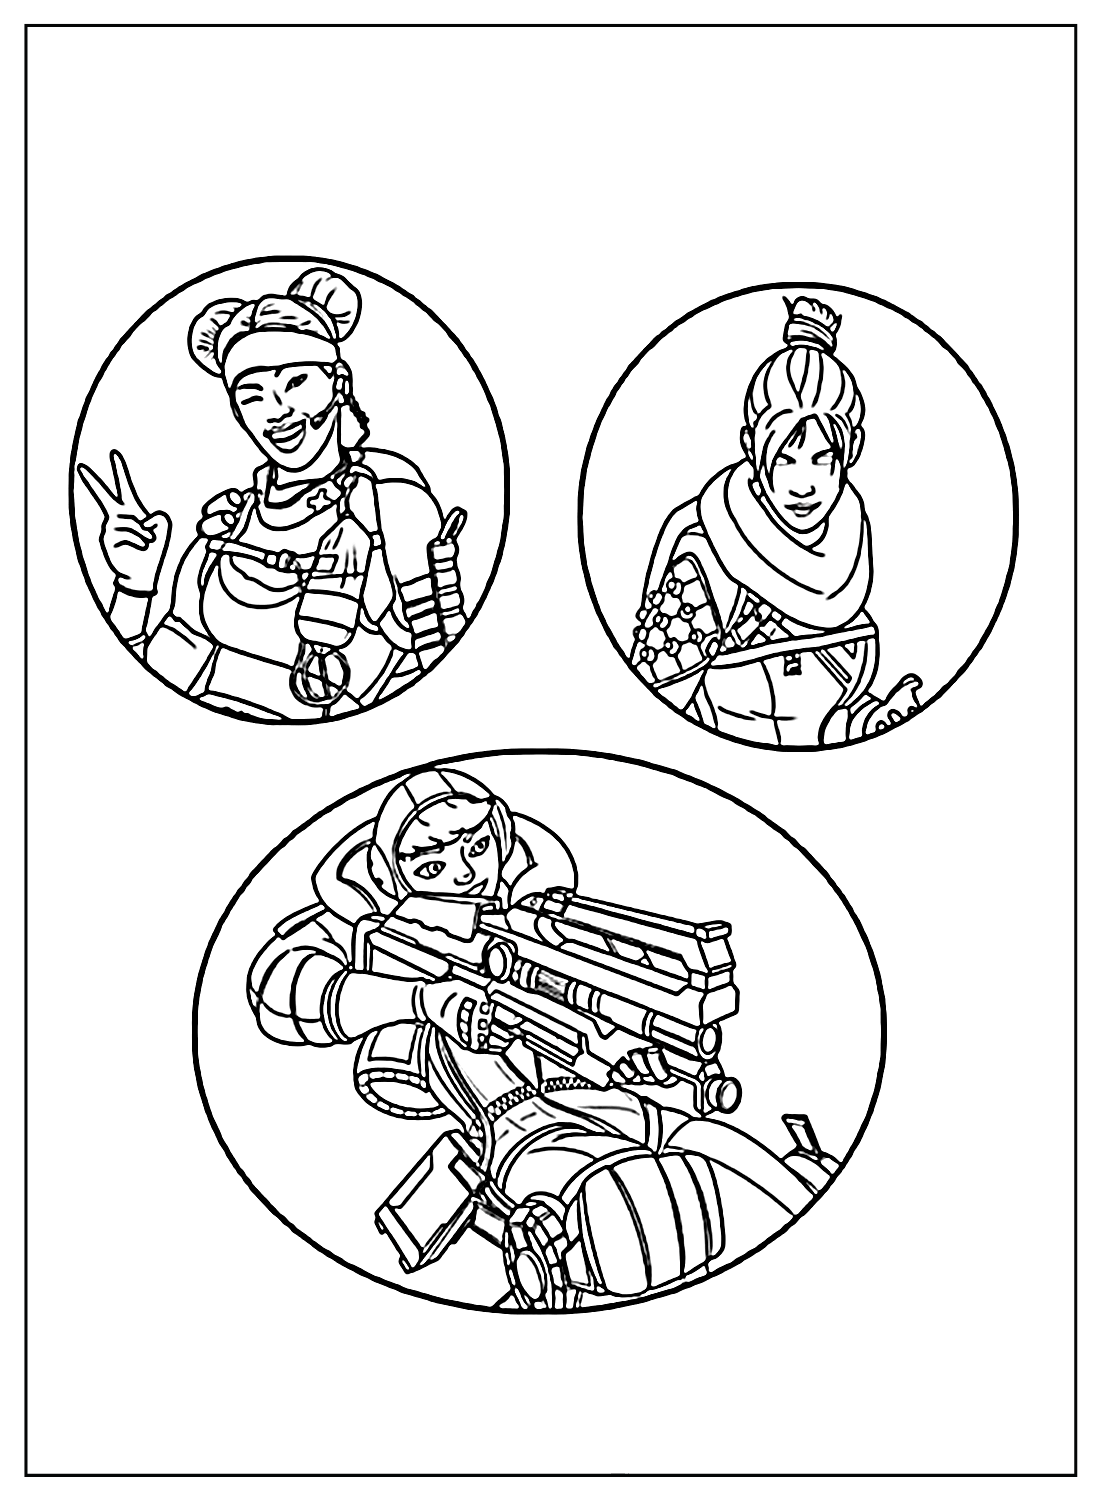 Apex Legends Girls Coloring Page from Apex Legends